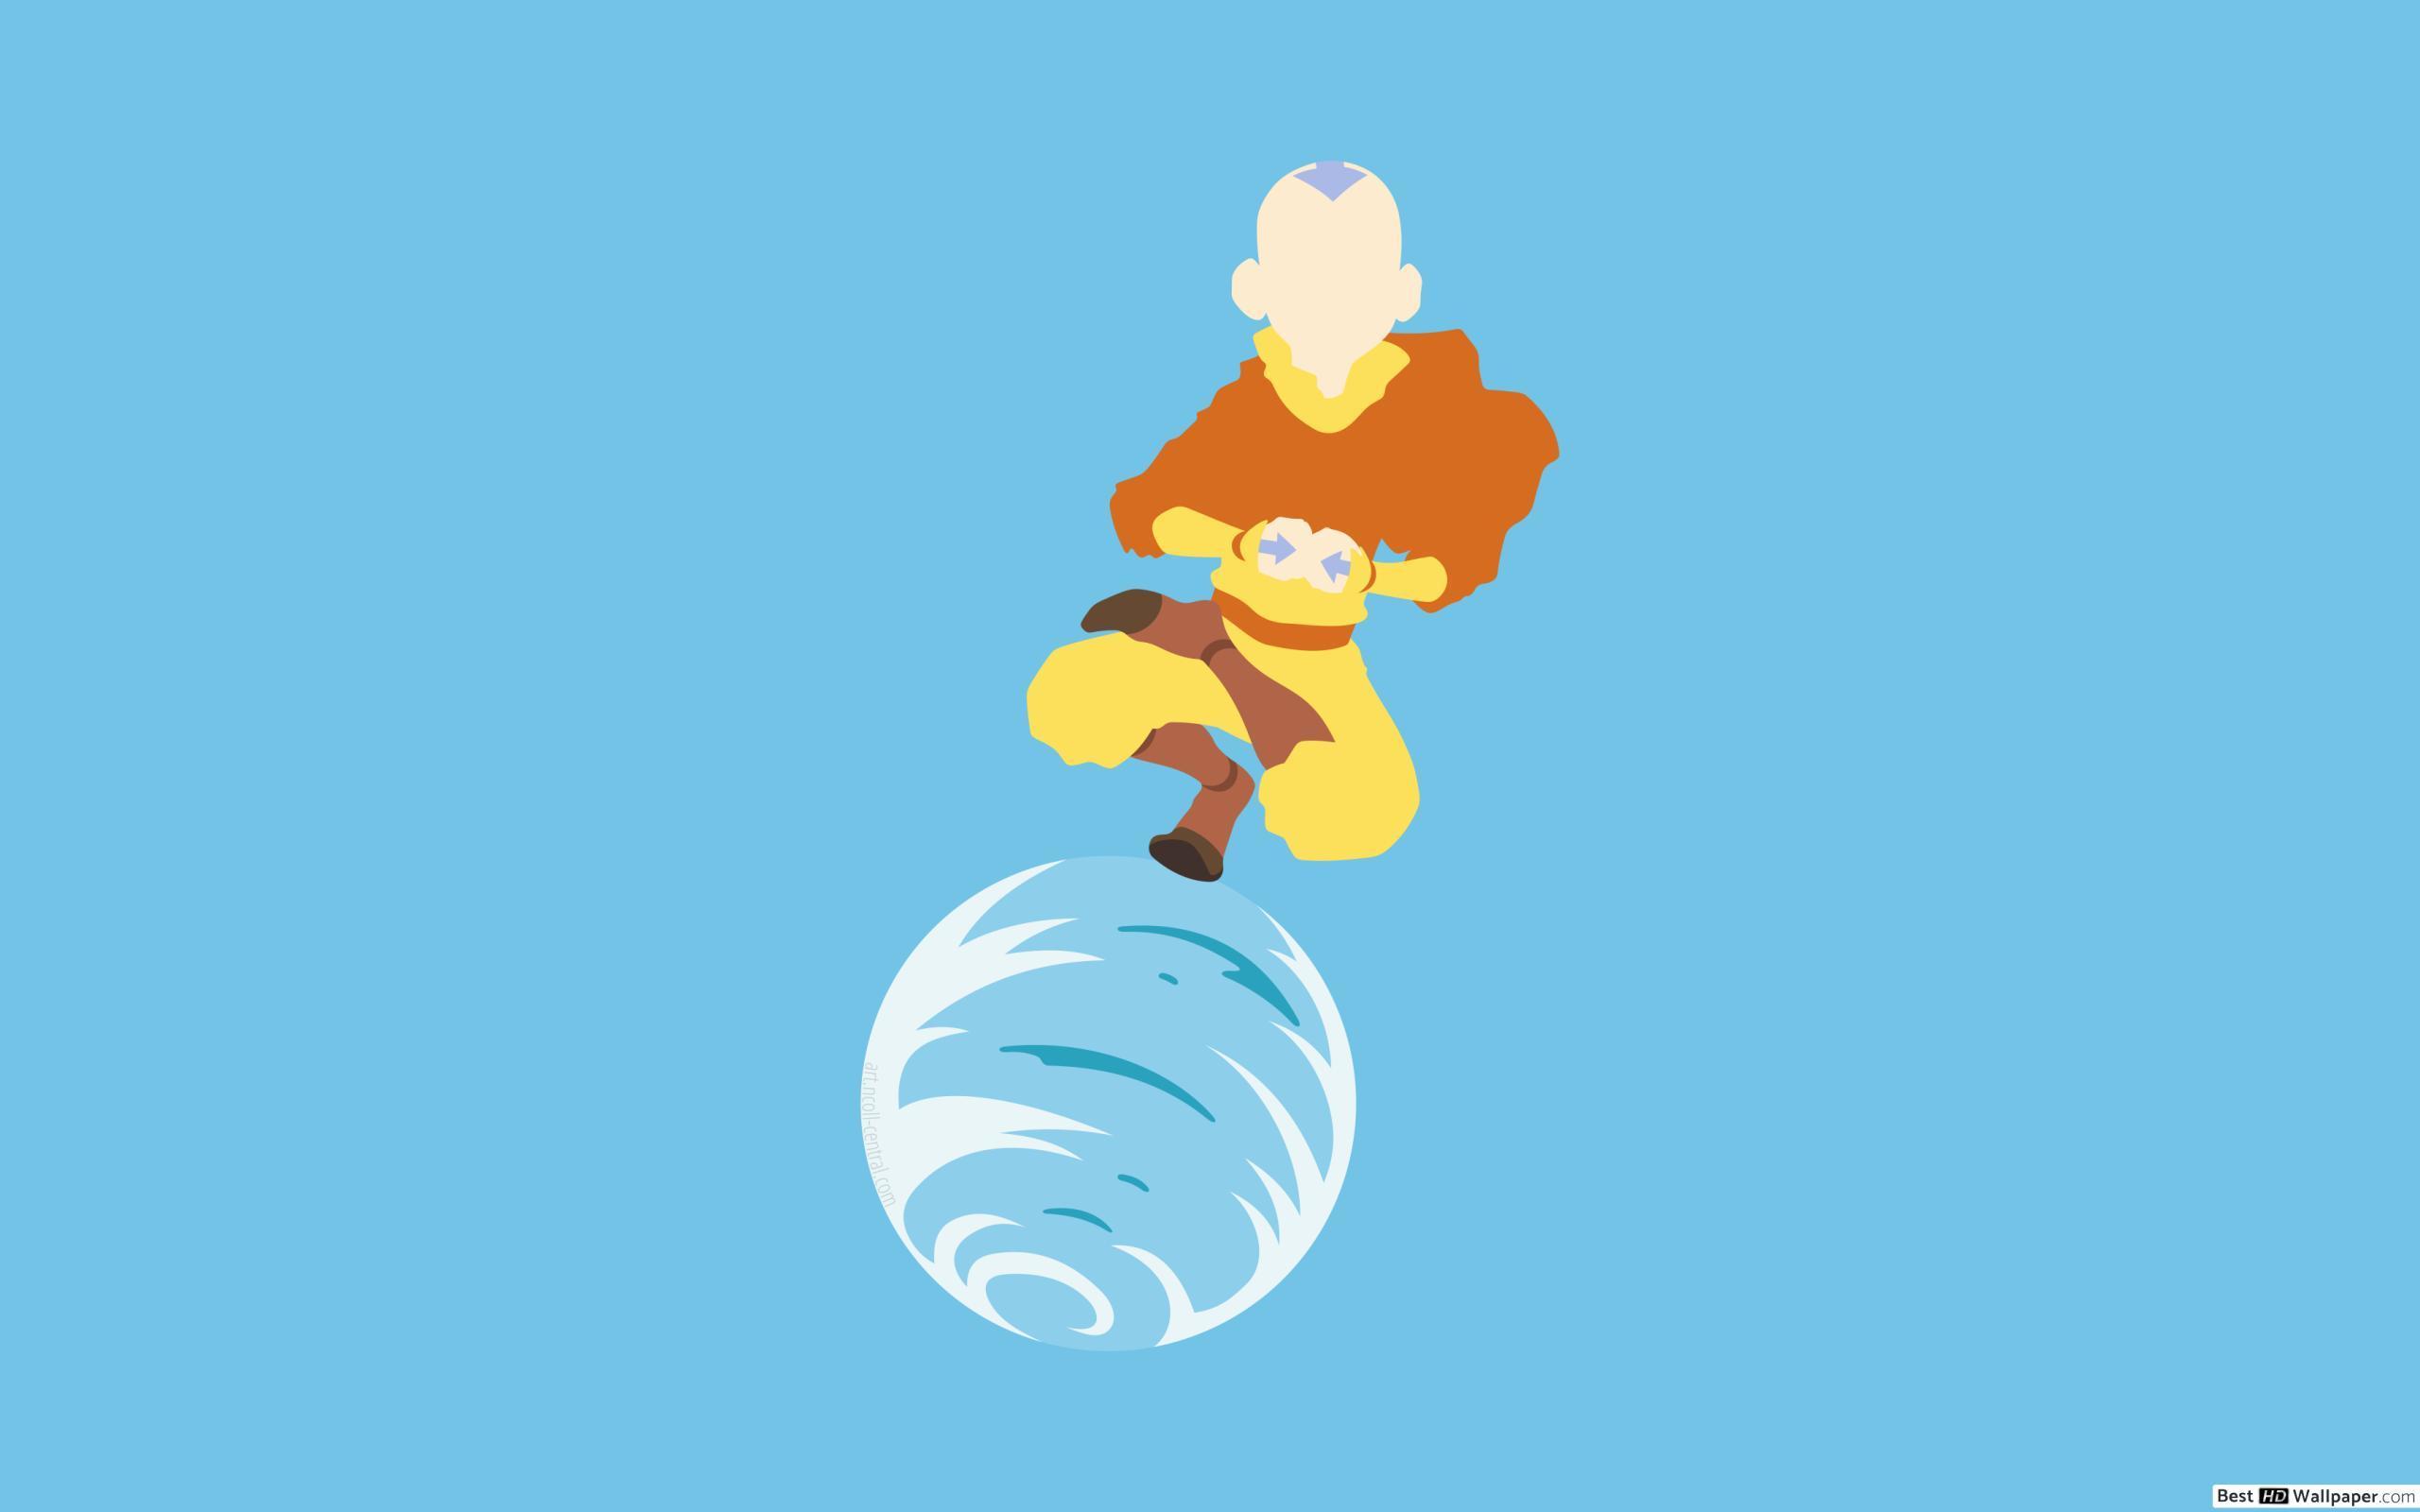 The Avatar and the Firelord Minimalist Wallpaper by DamionMauville on  DeviantArt